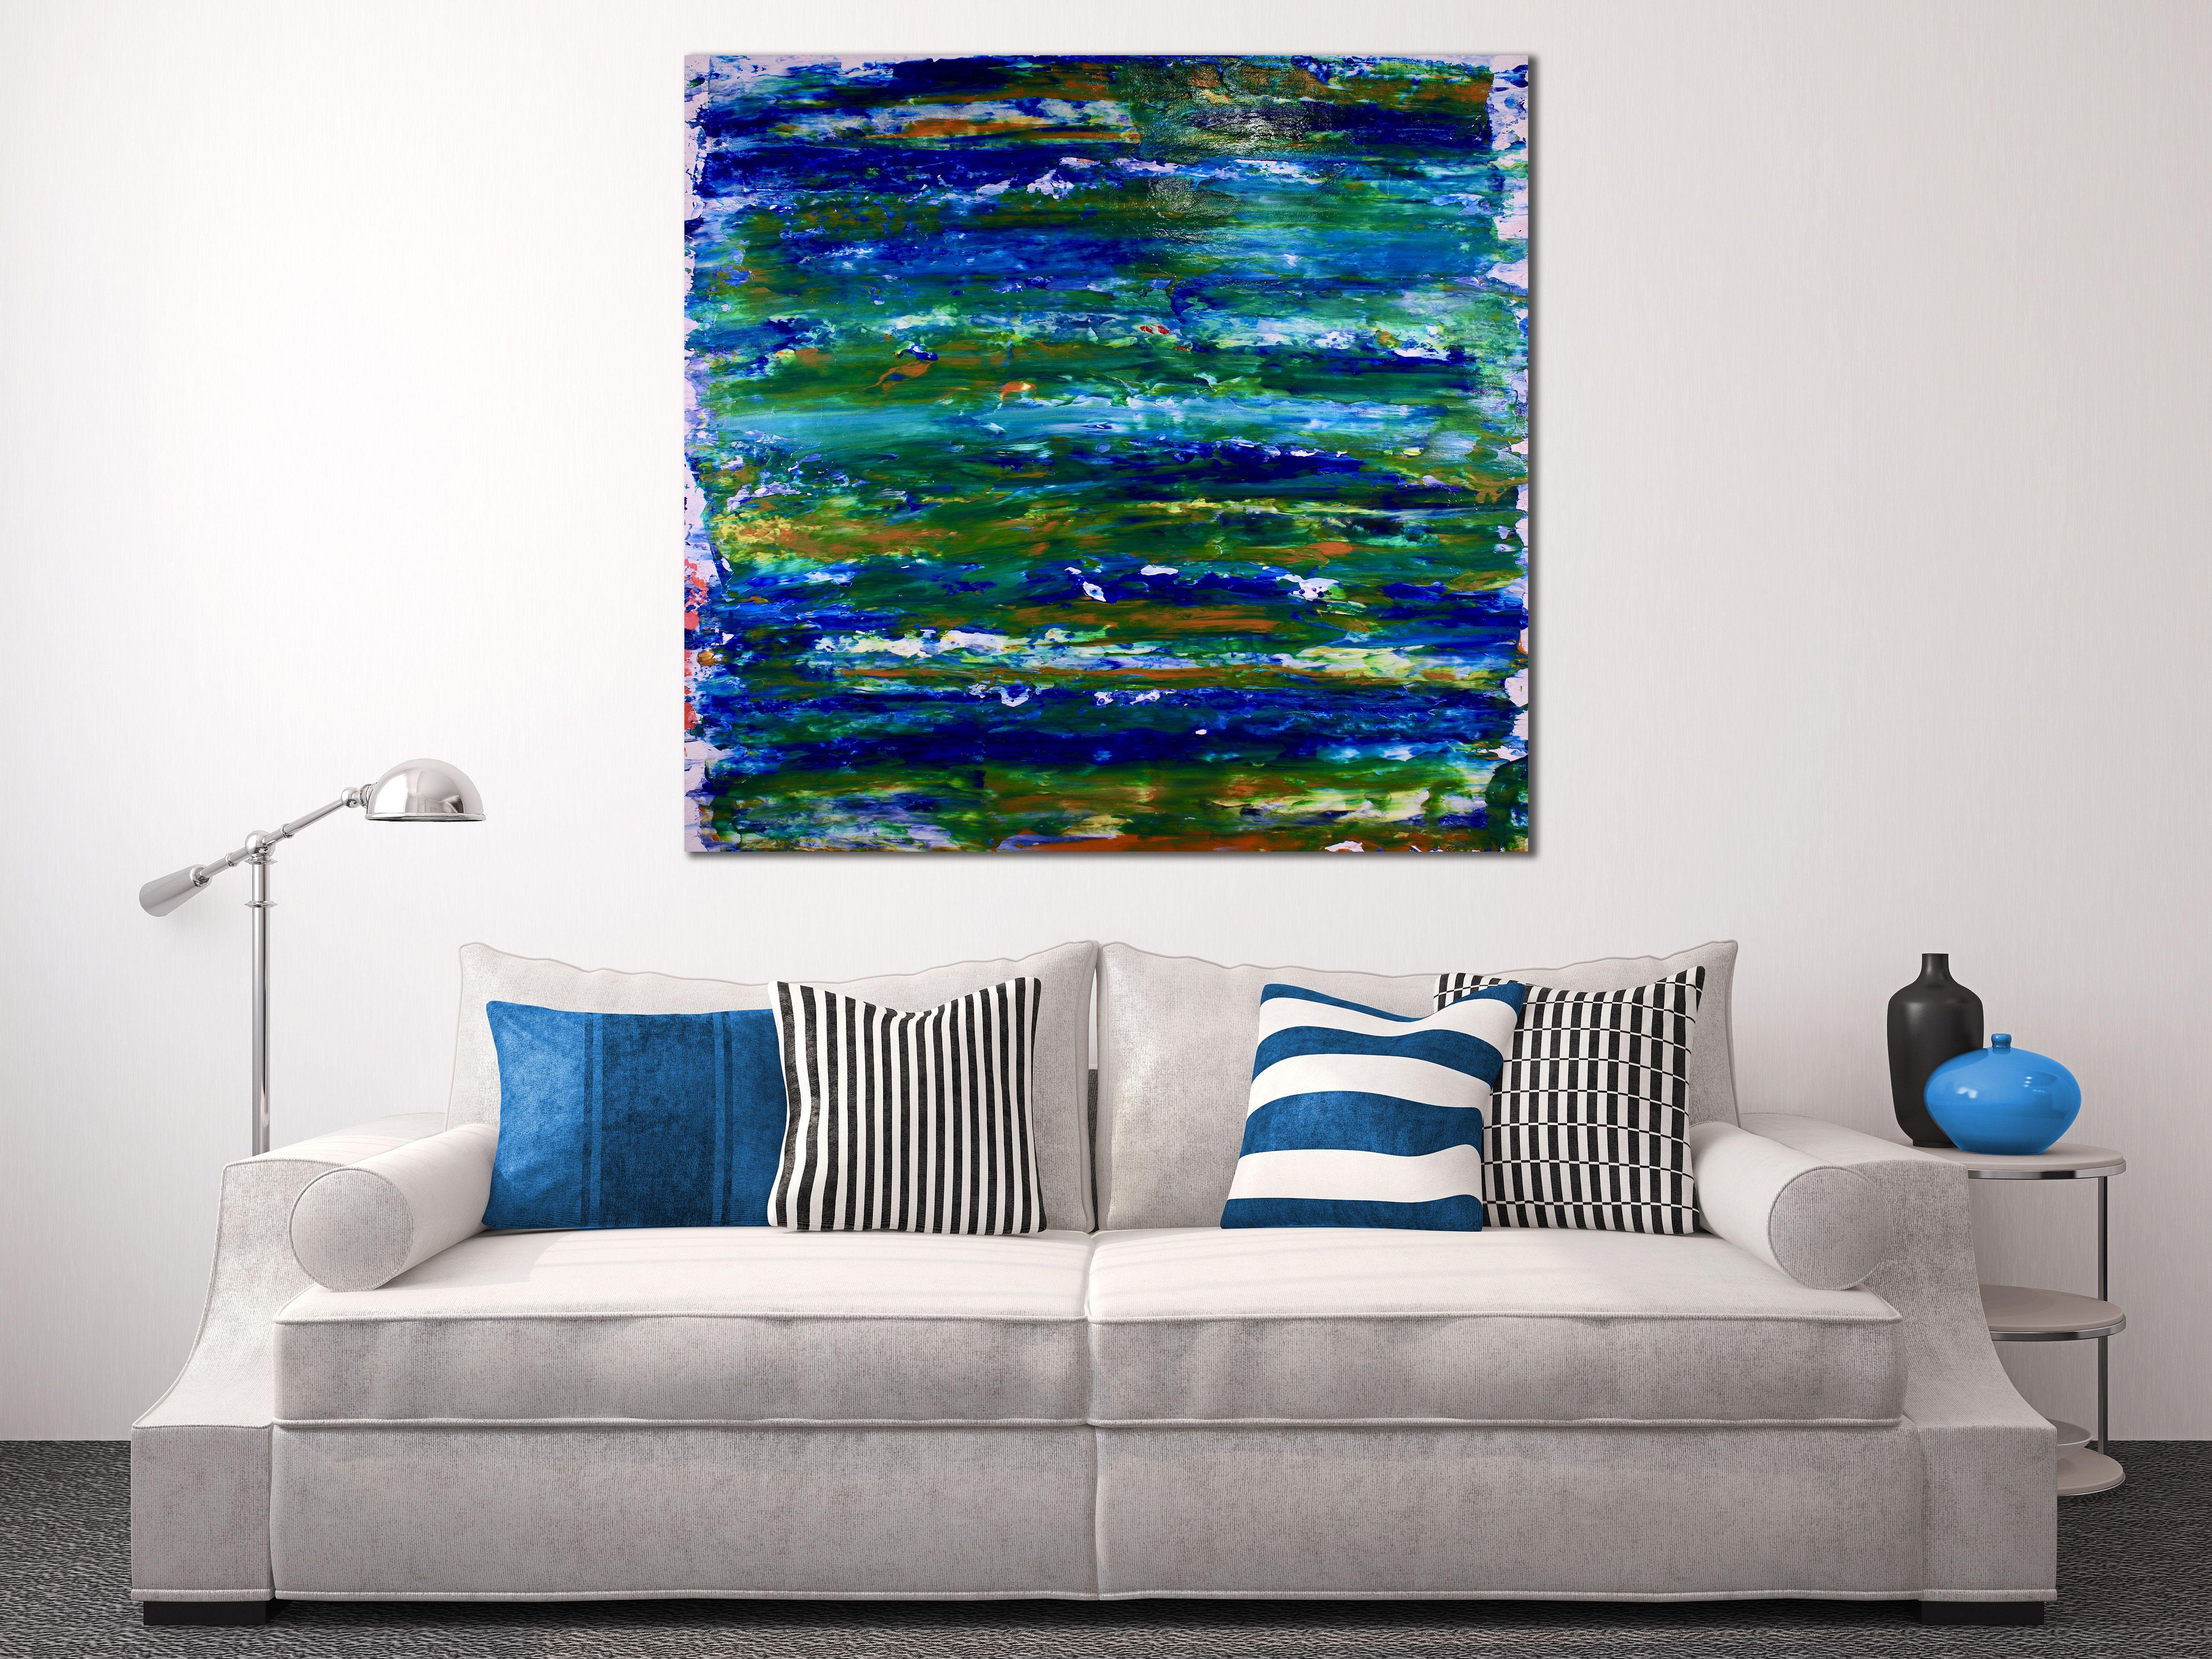 Visionary Terrain 5, Painting, Acrylic on Canvas - Blue Abstract Painting by Nestor Toro